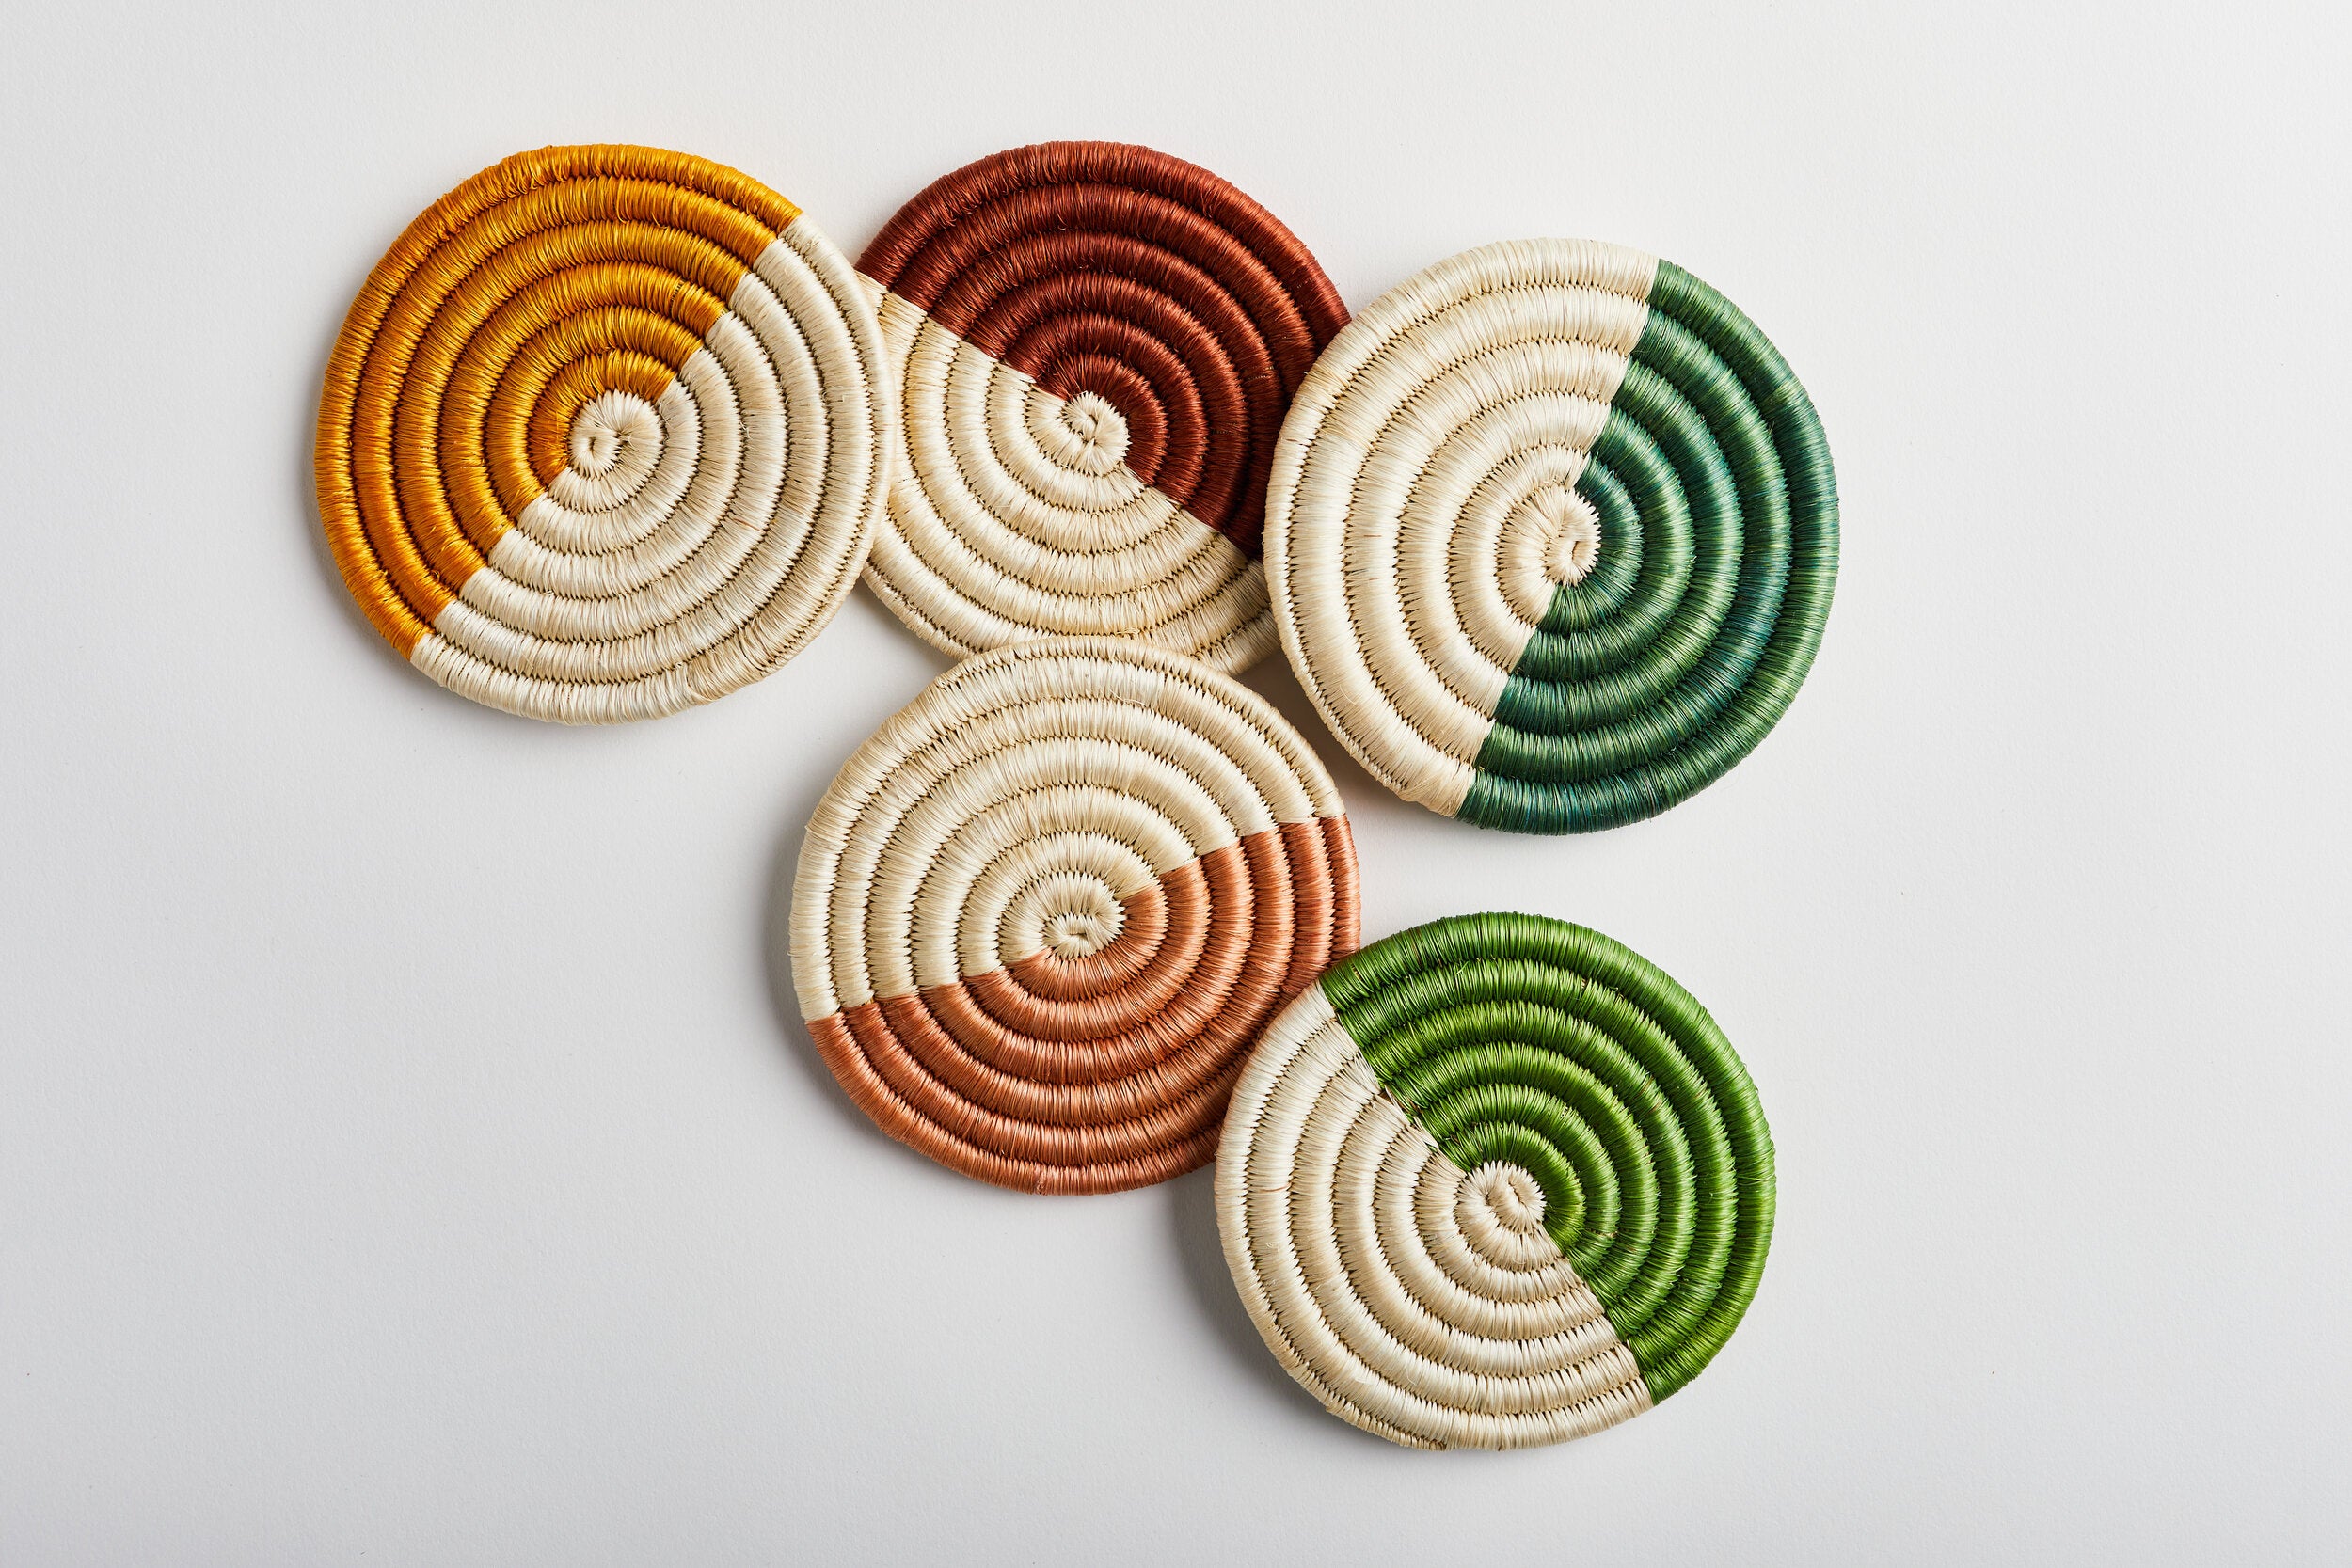 Monserrate Woven Coasters (6 colors) by Zuahaza